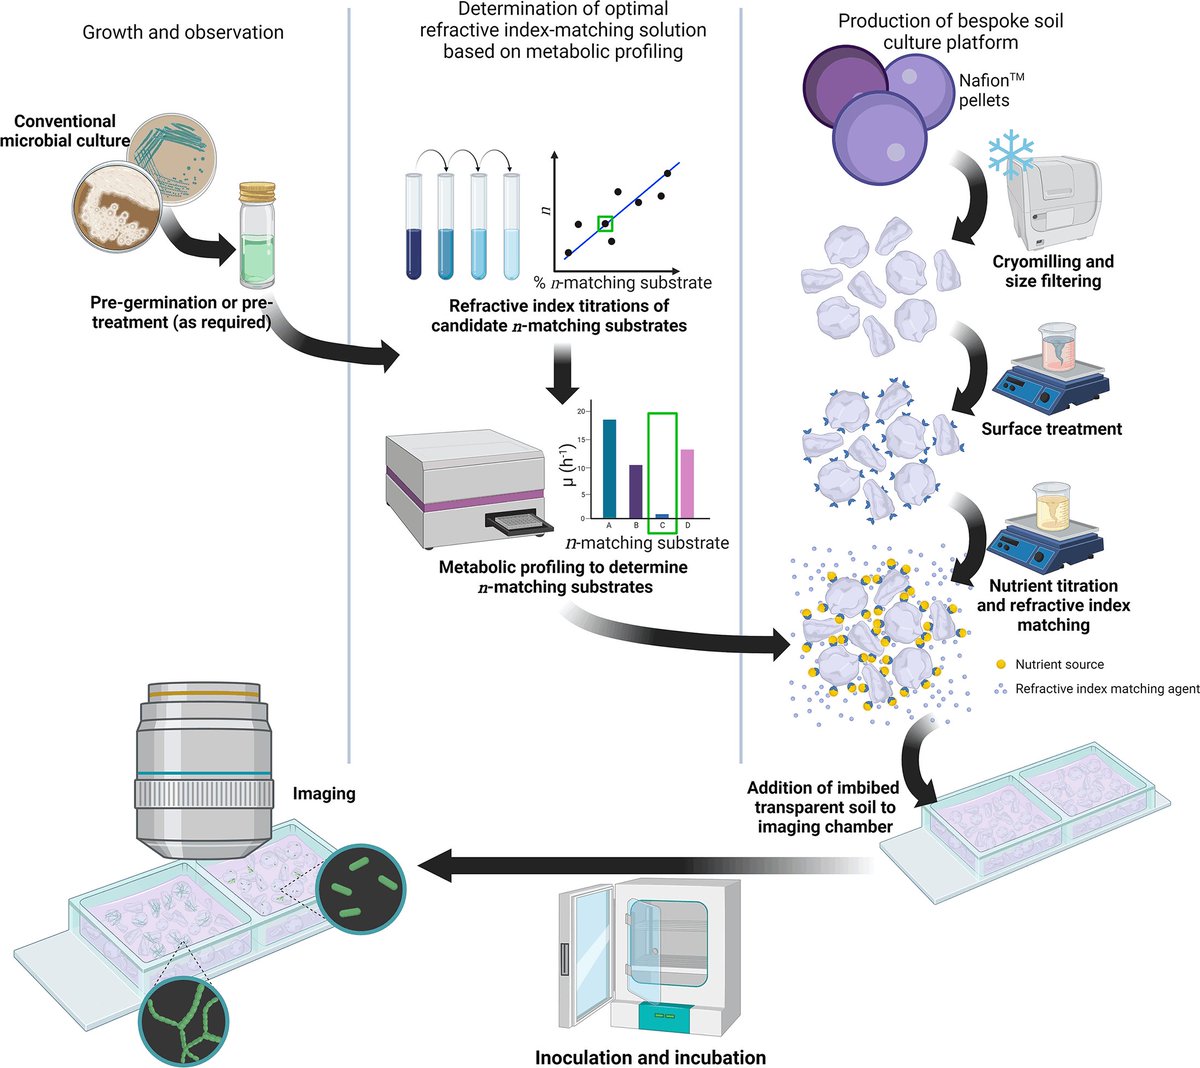 Construction and characterisation of a structured, tuneable, and transparent 3D culture platform for soil bacteria in Microbiology by Liam M Rooney et al with @PaulHoskisson and @gailmcconnell microbiologyresearch.org/content/journa…